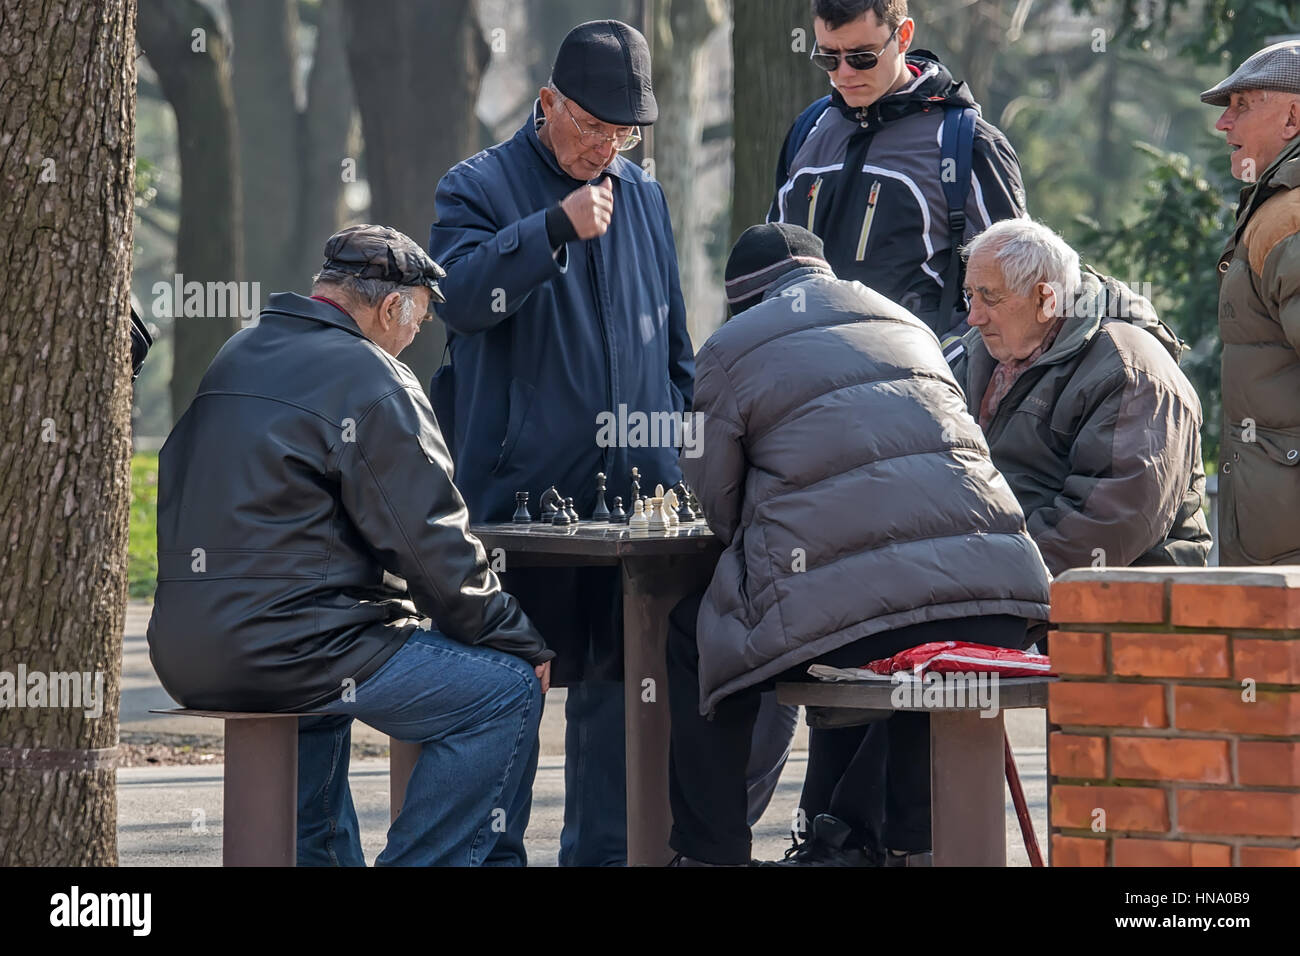 Belgrade, Serbia - February 27, 2016: The group retirees play chess in the park Stock Photo